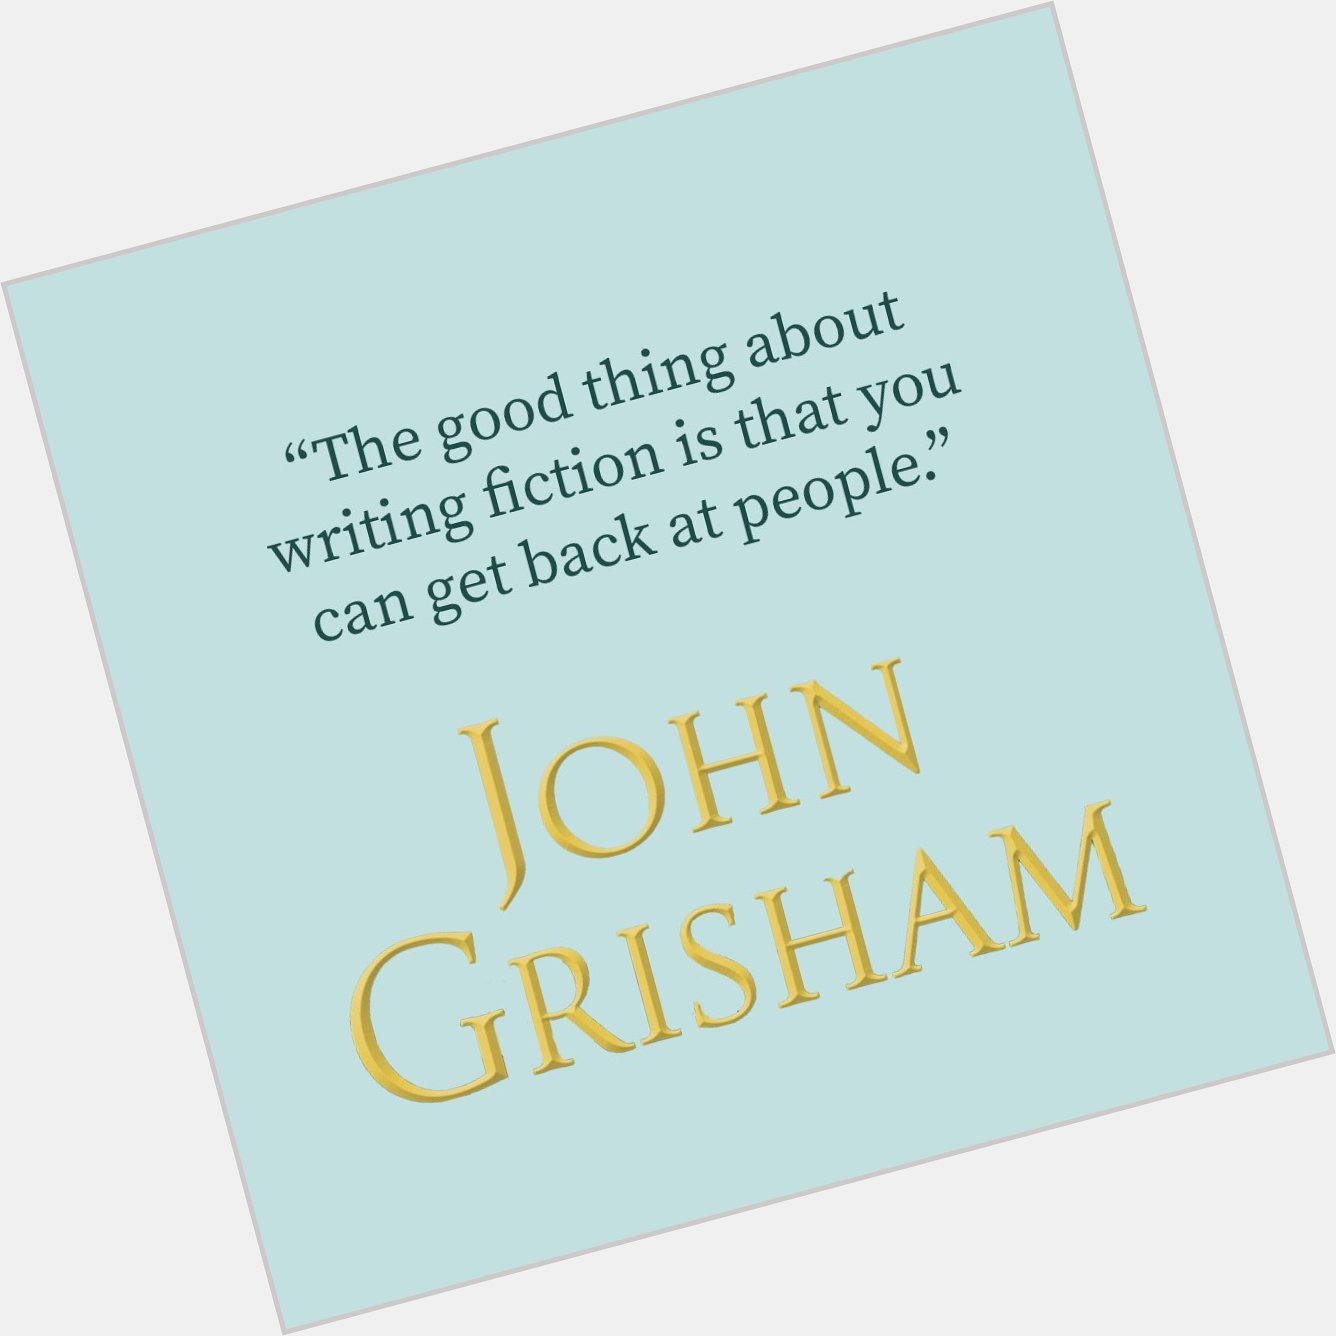 Happy 65th birthday to John Grisham! The esteemed author has written dozens of bestselling legal thrillers. 